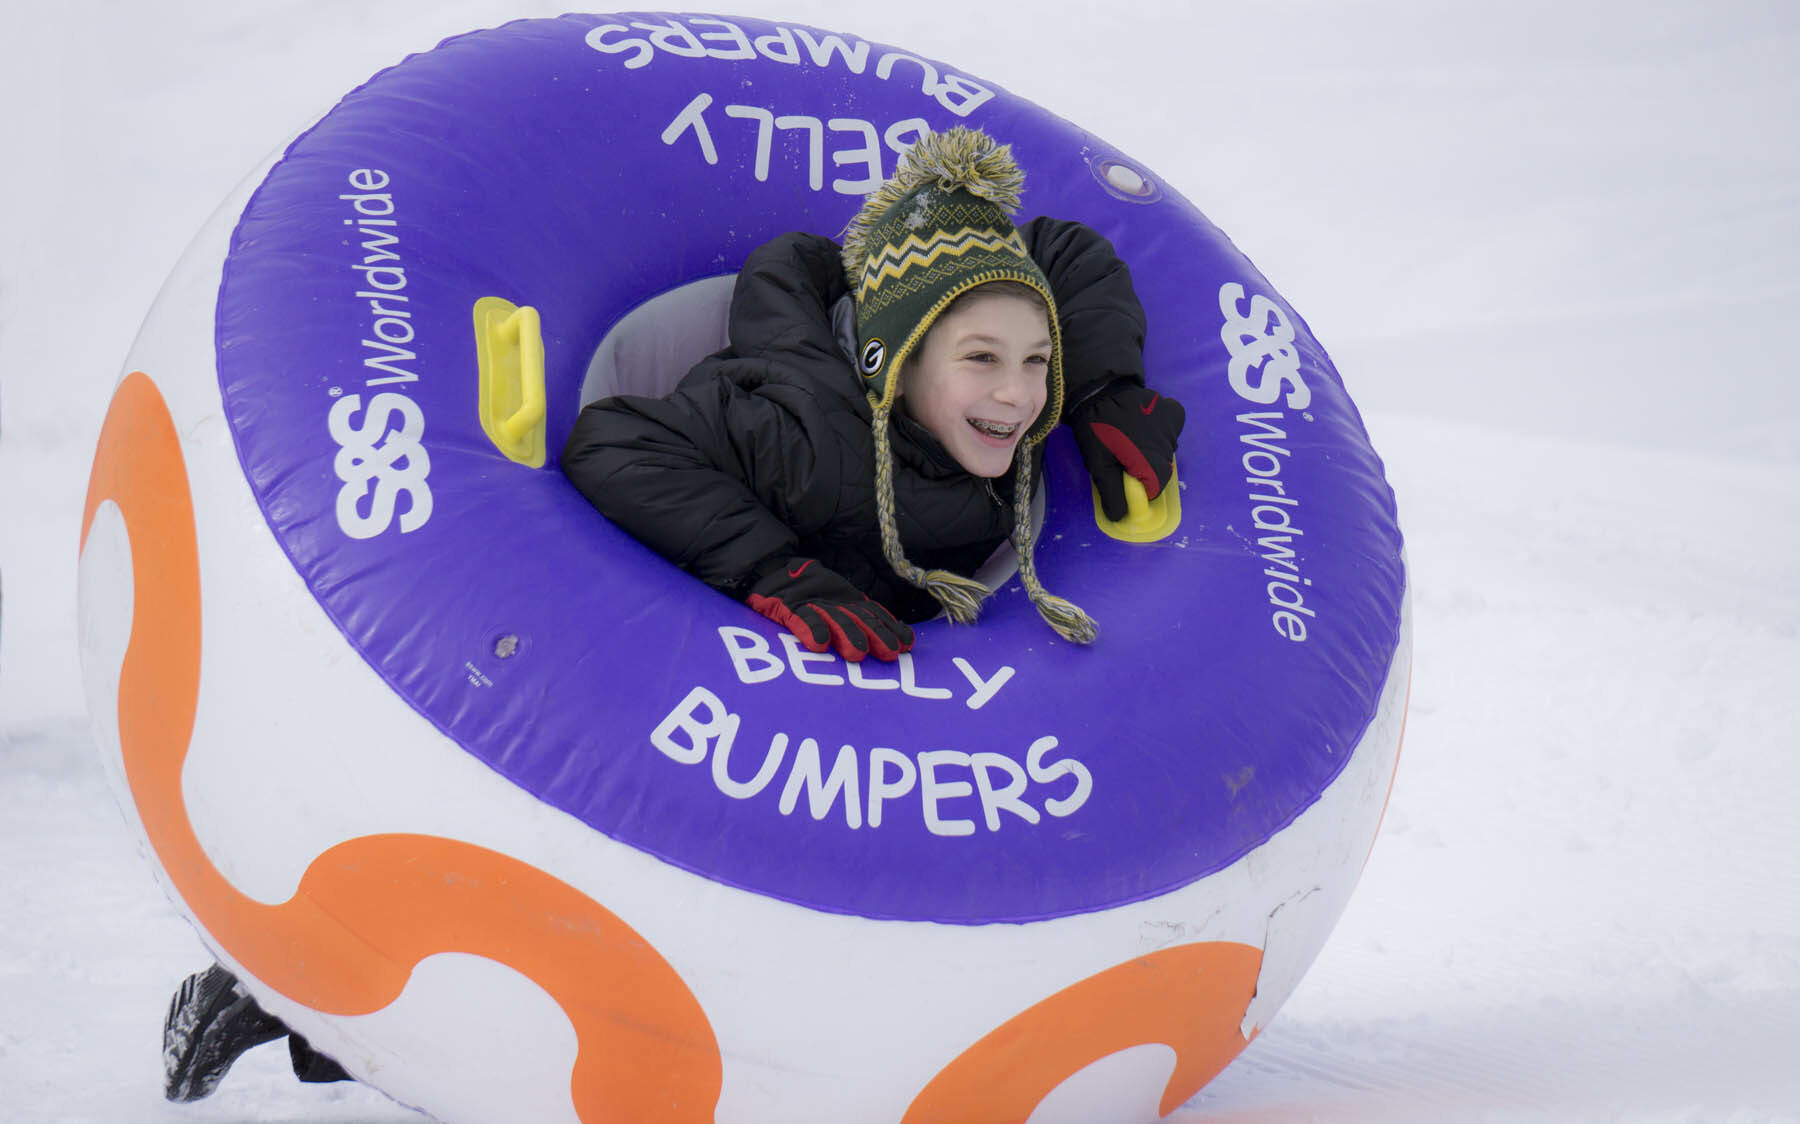 Young person in a belly bumper inner tube in winter.